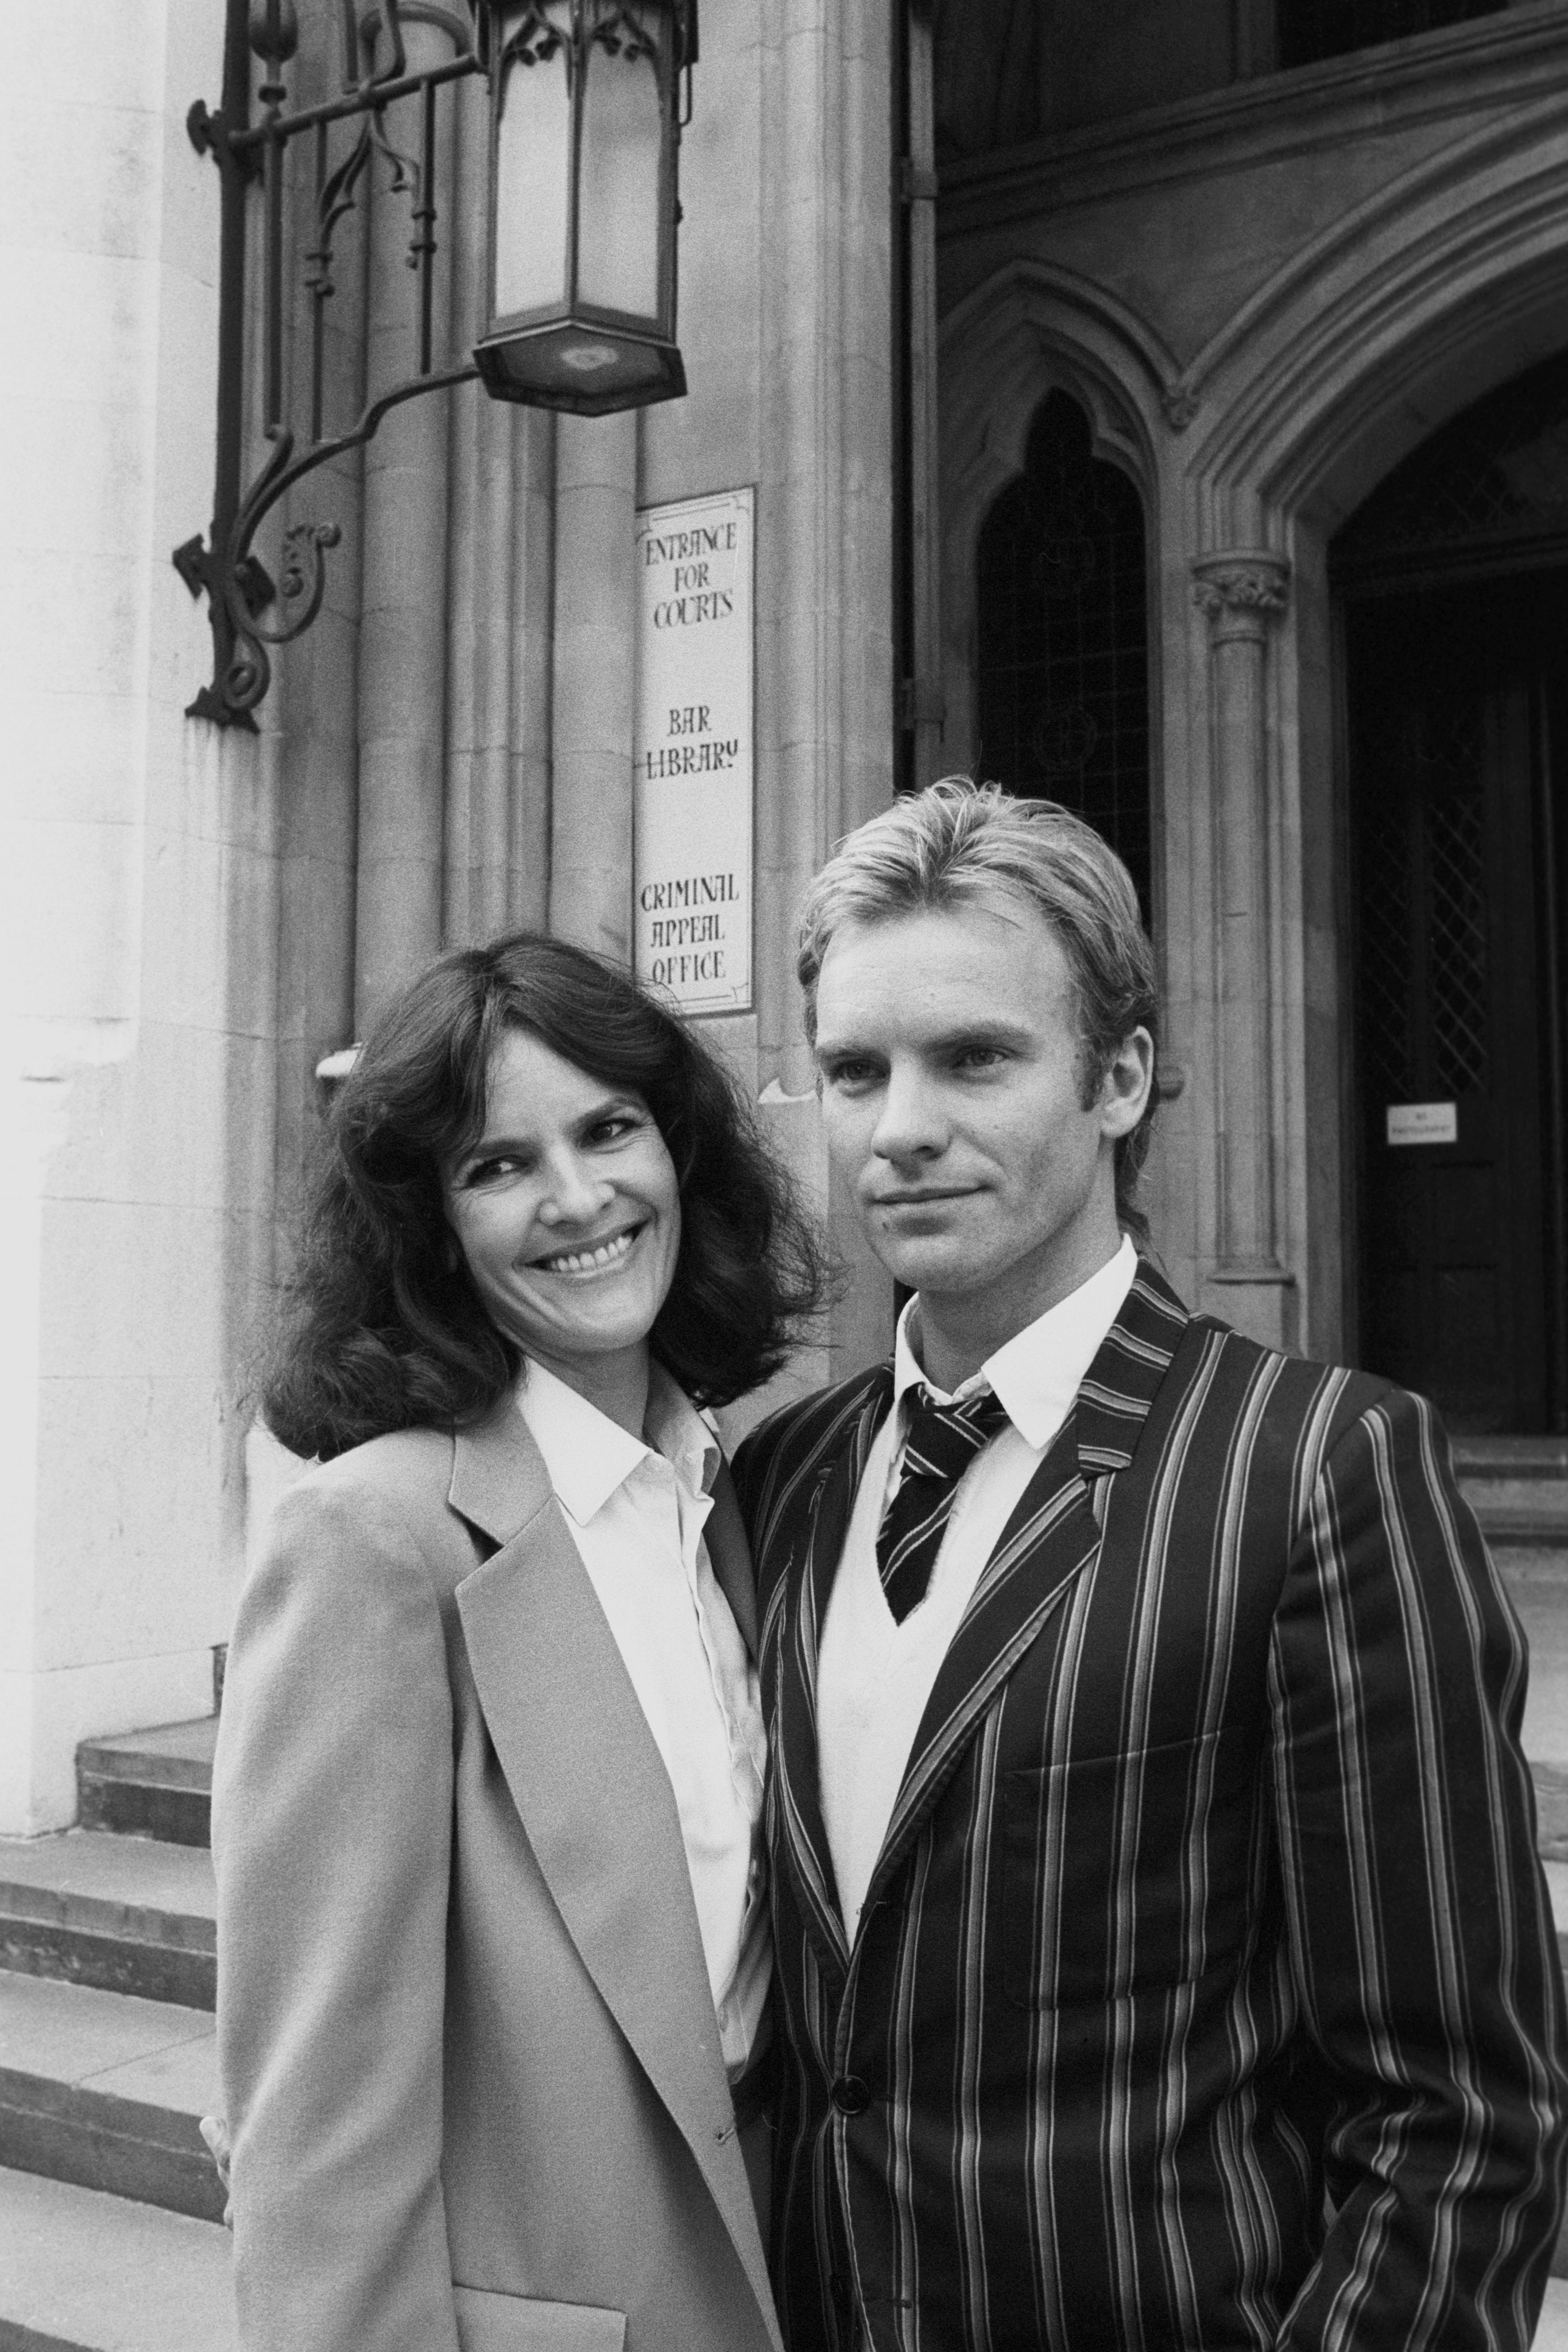 Sting and Frances Tomelty at the London High Court in July 1982, in London. | Source: Getty Images